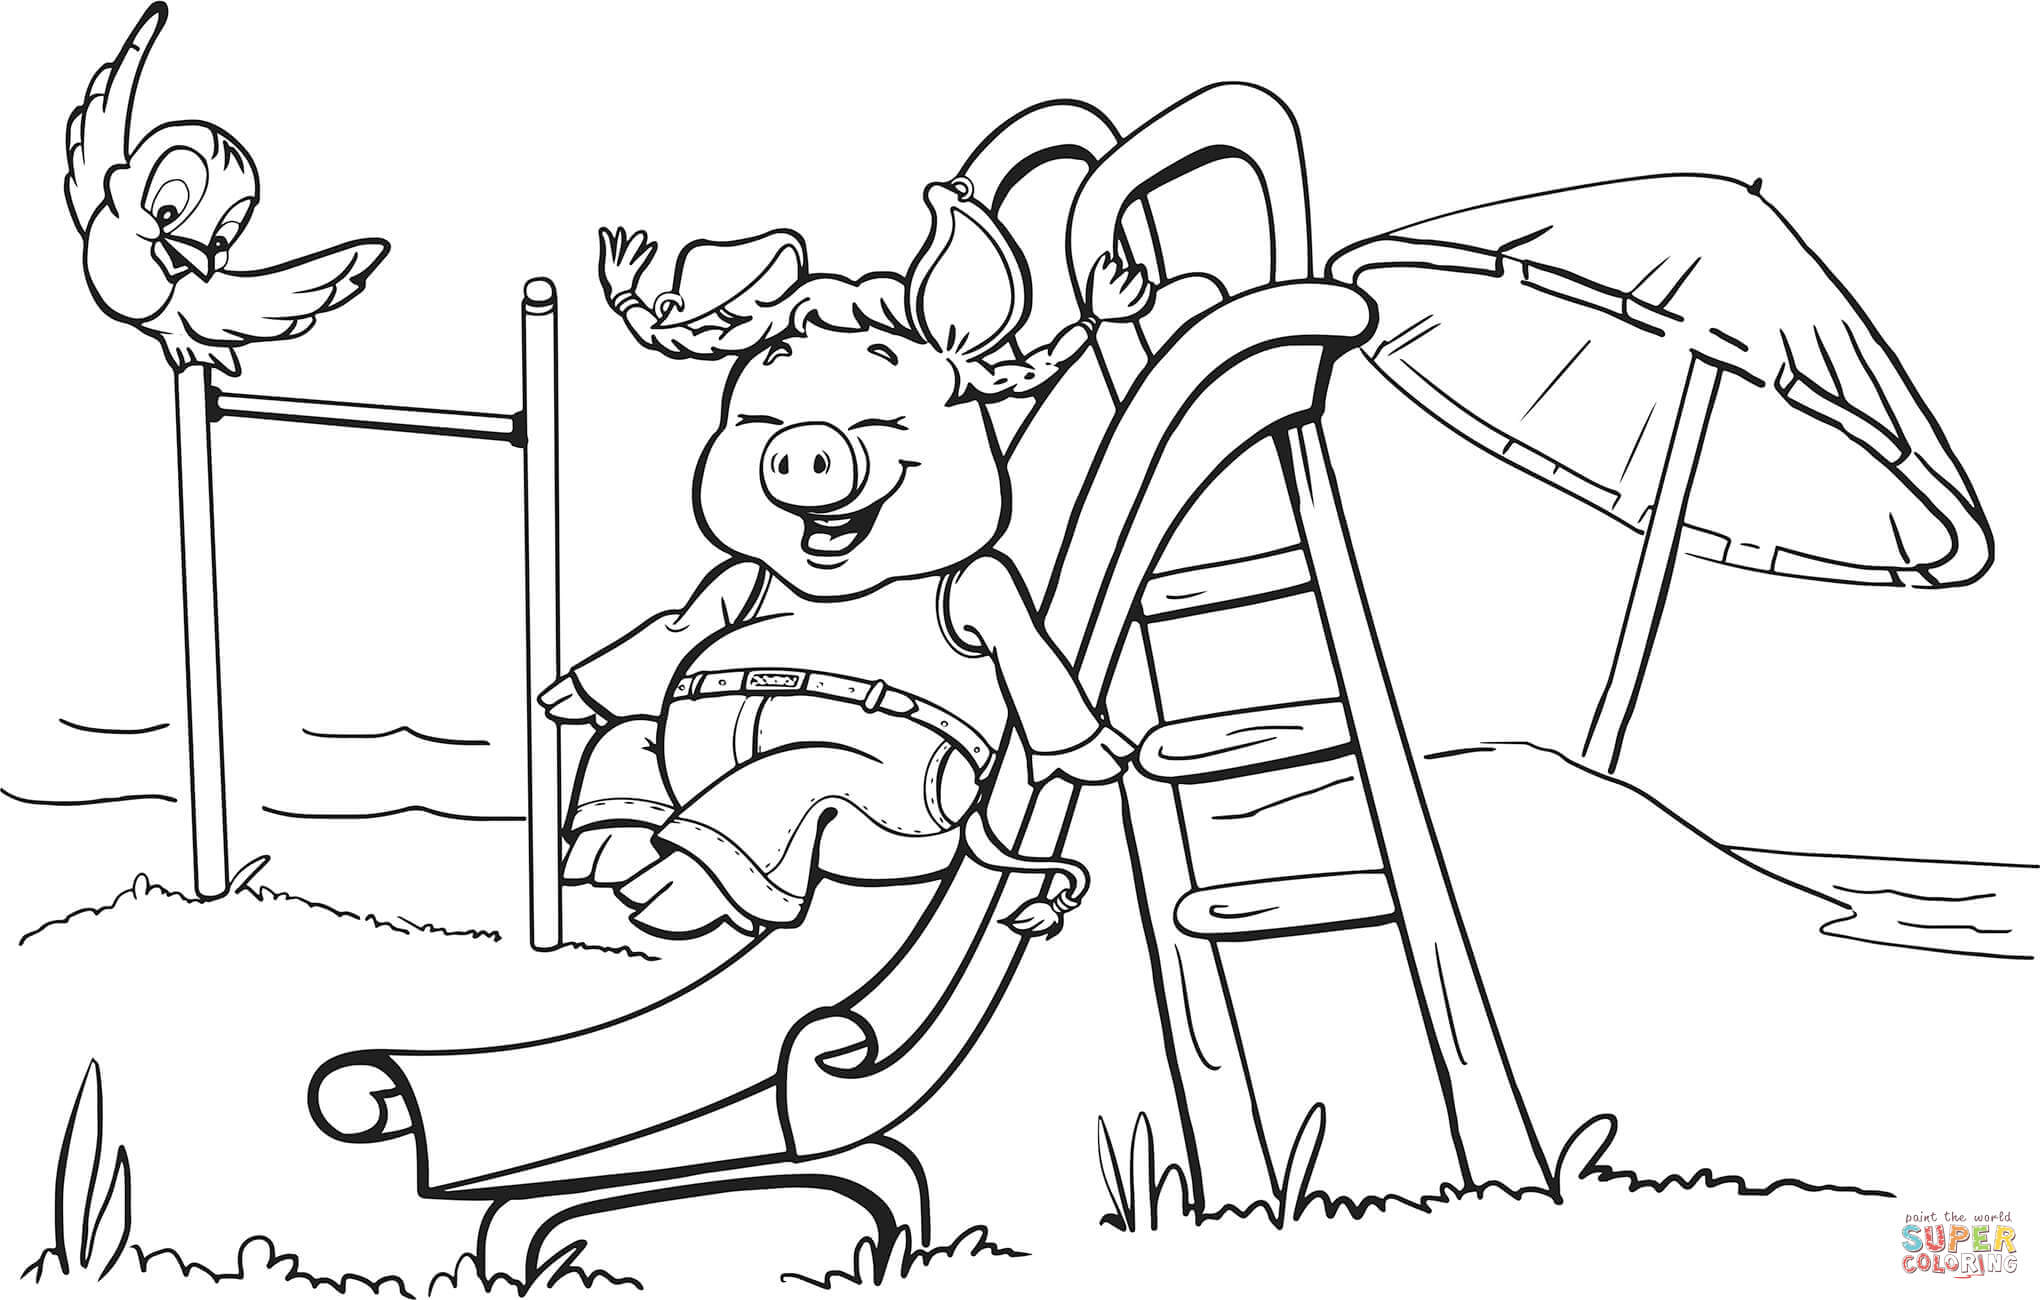 Pig on the Playground Slide coloring page | Free Printable ...